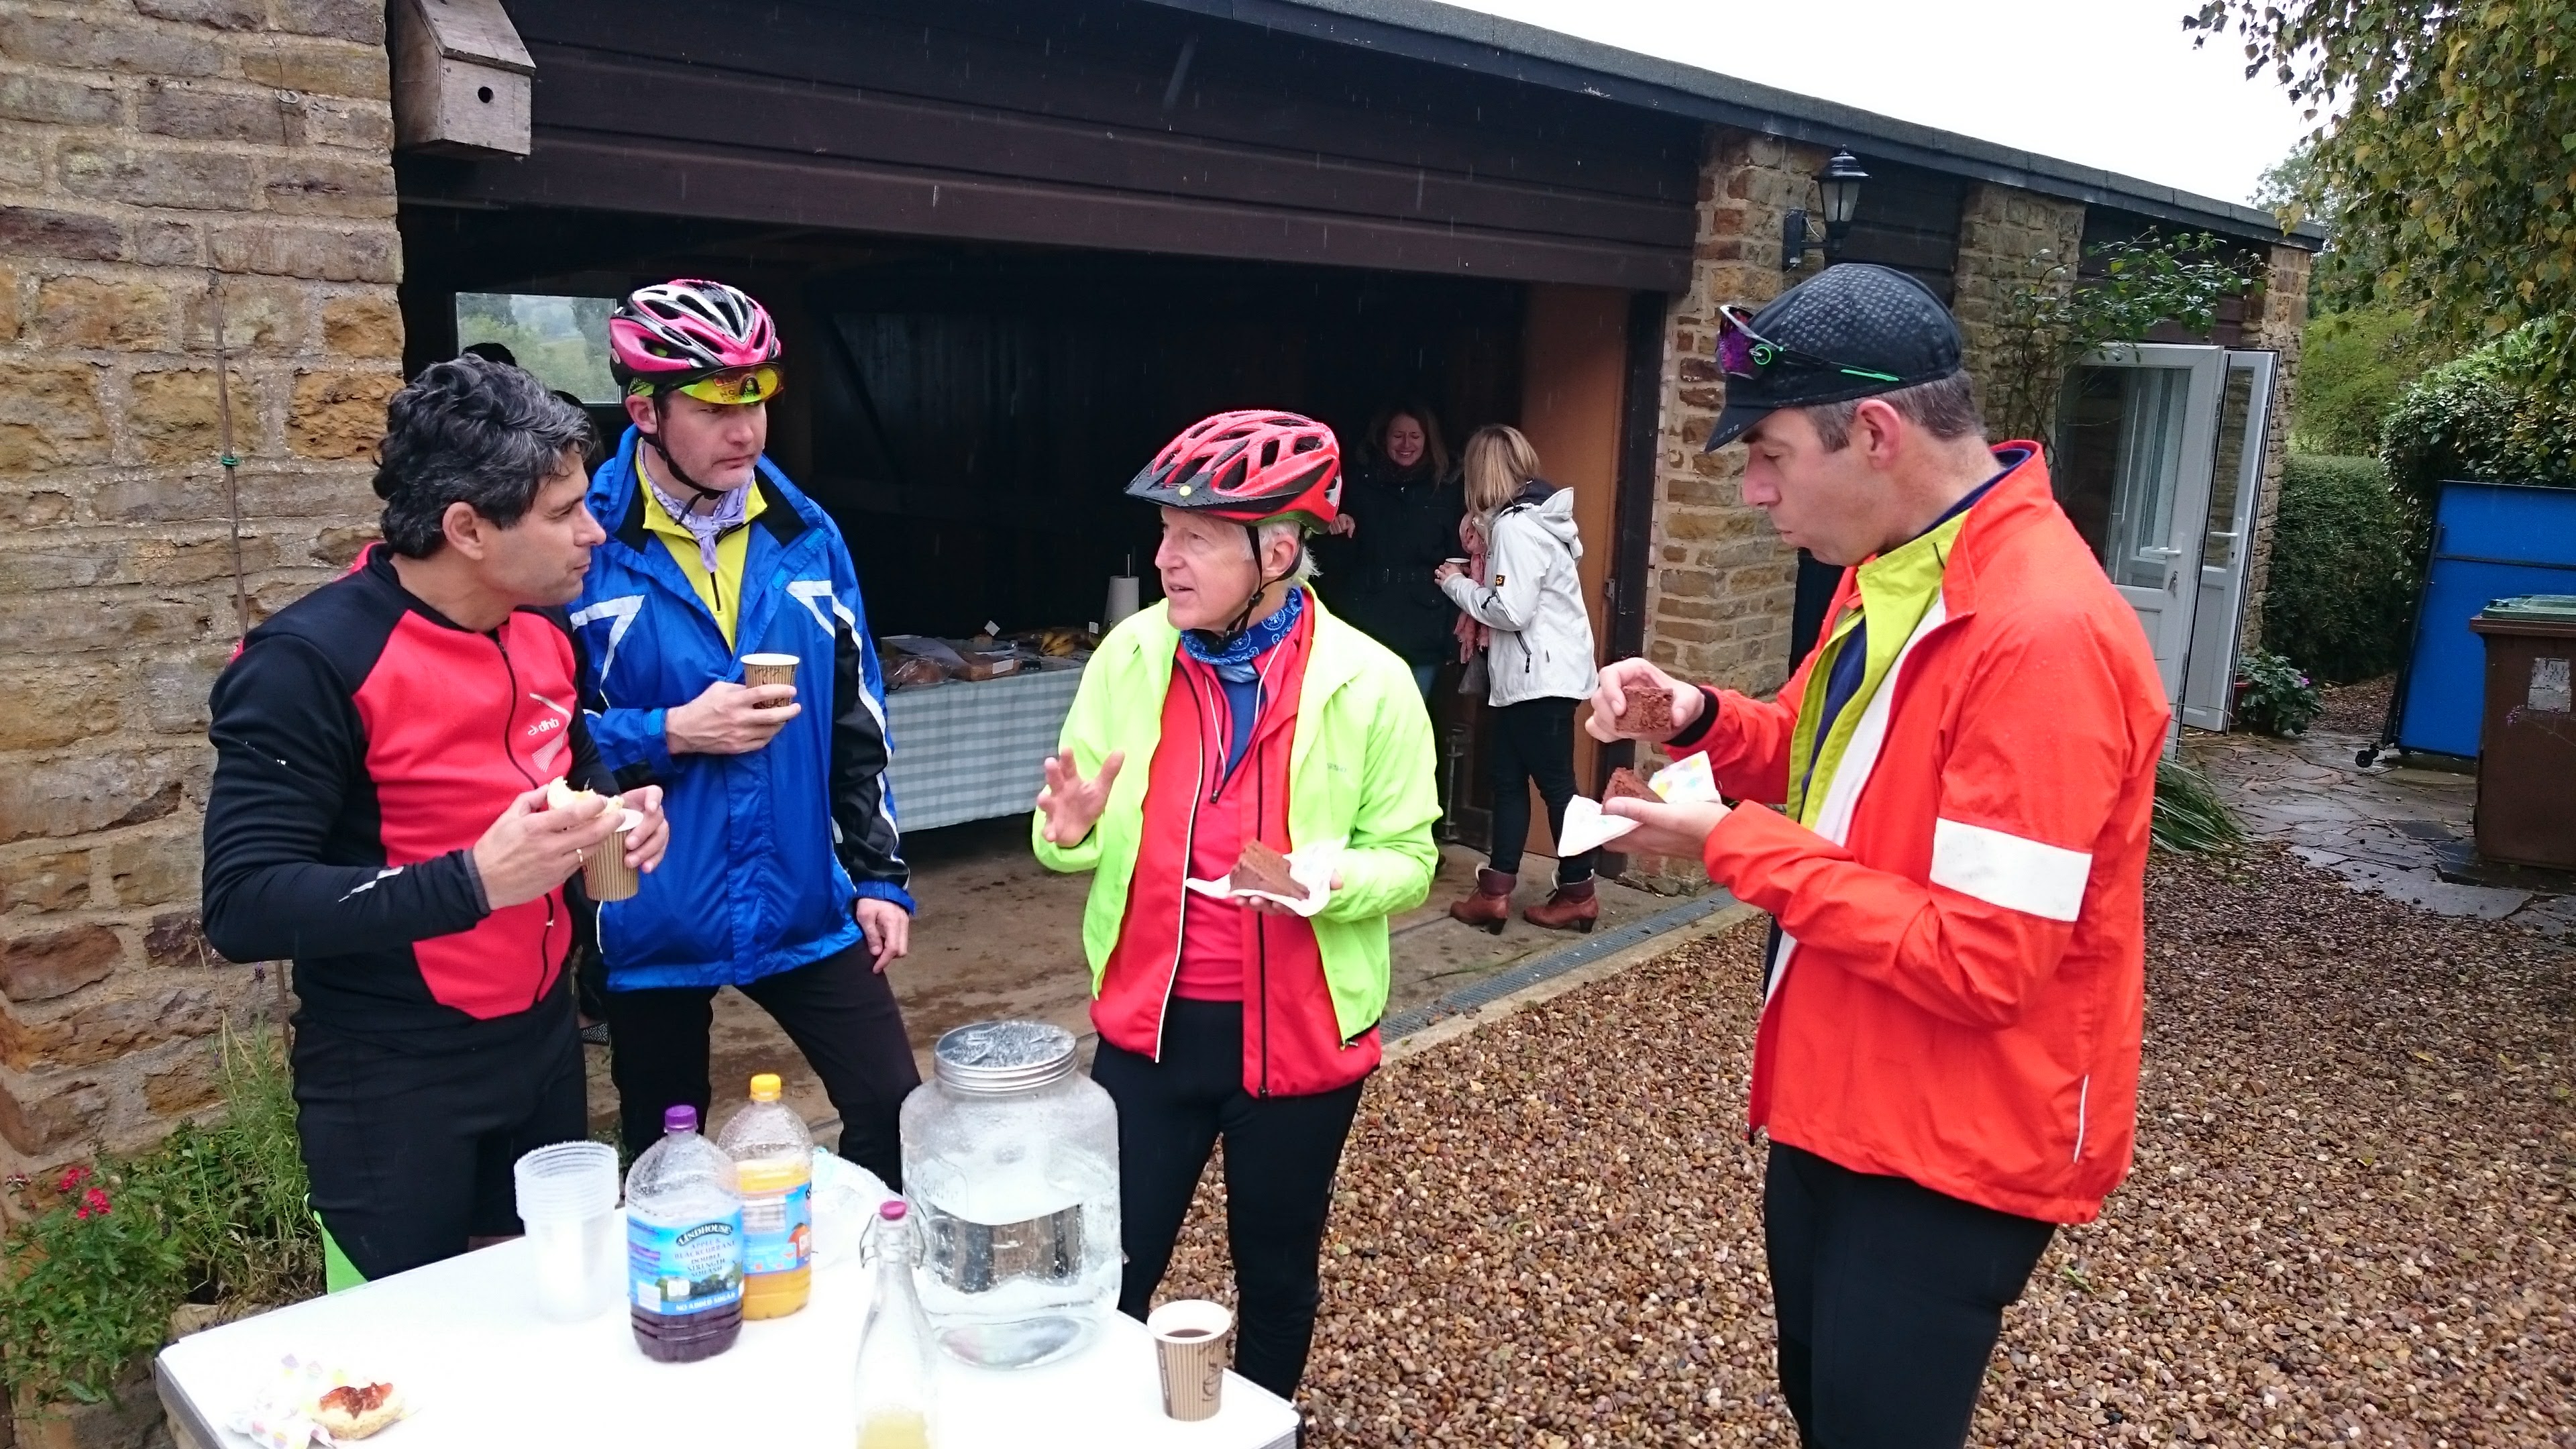 CTC Northampton cyclists enjoying coffee and cake outdoors at the renowned Great Brington pop-up cafe